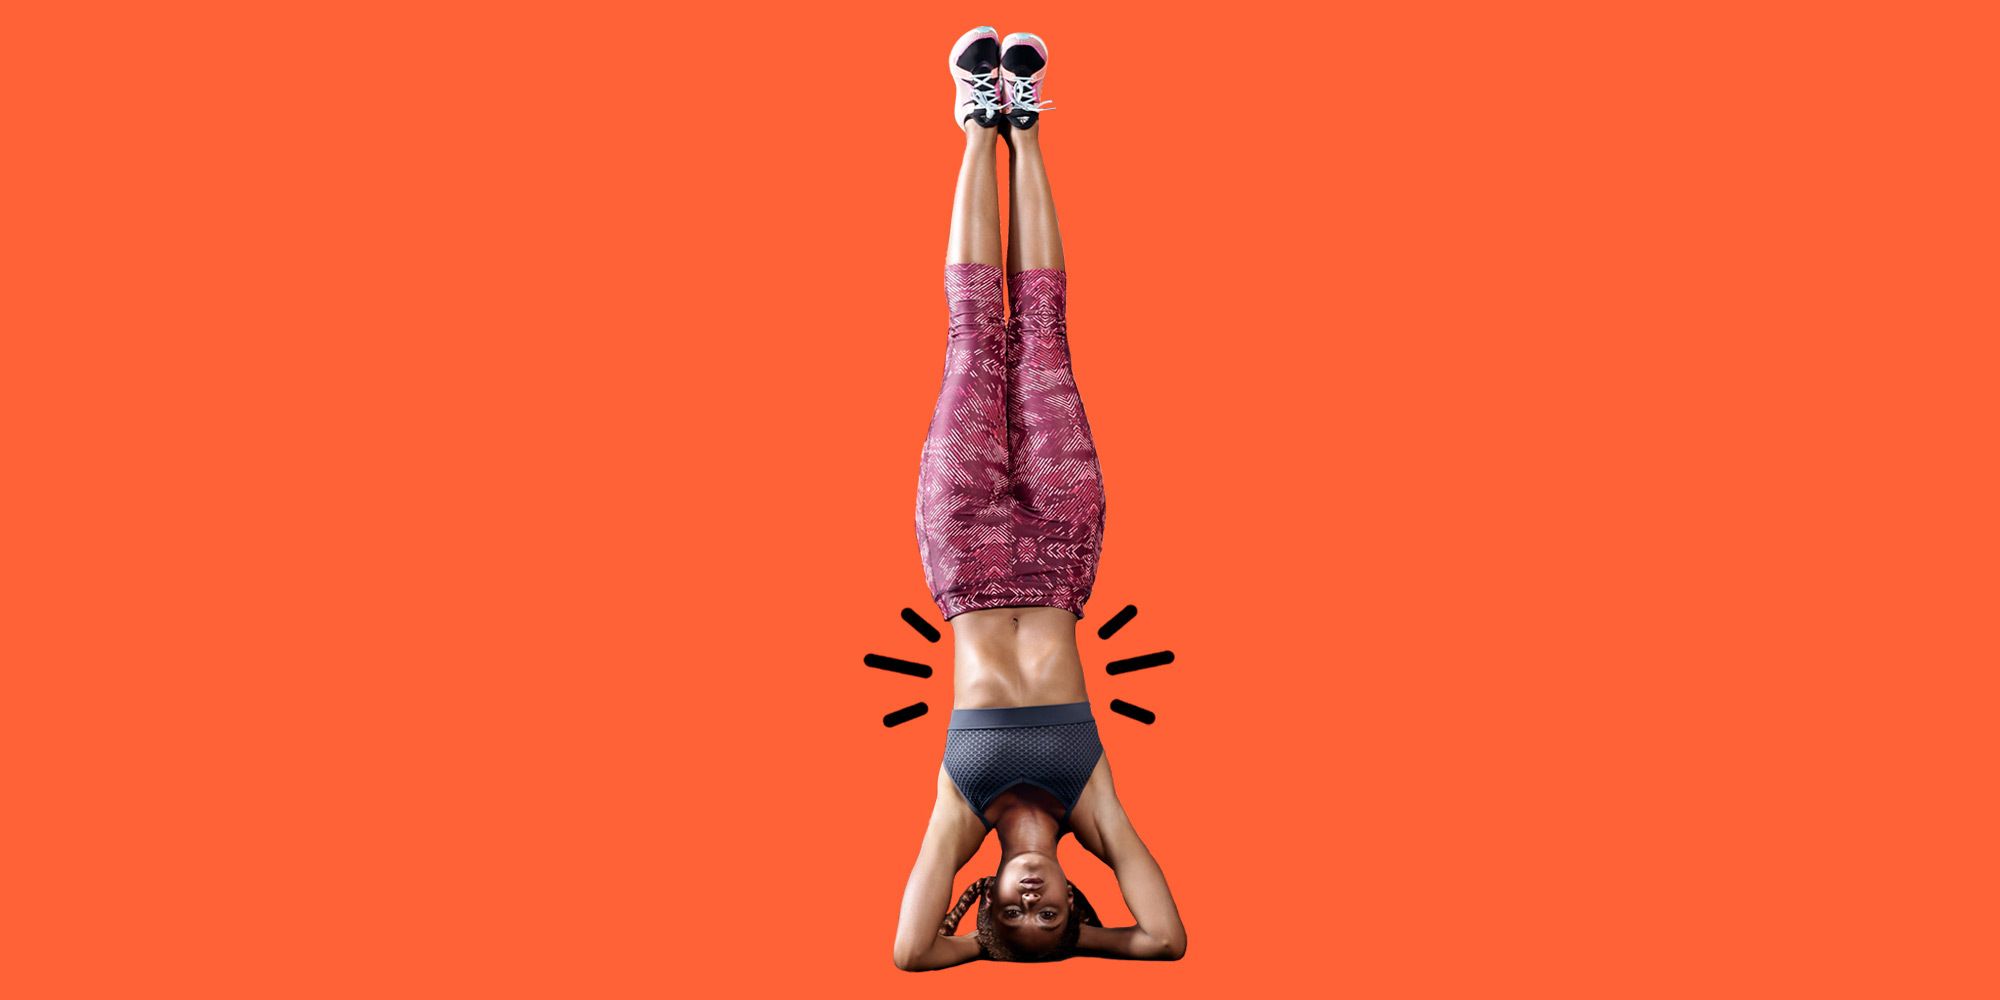 How To Do a Headstand Yoga: Step-by-Step Instructions